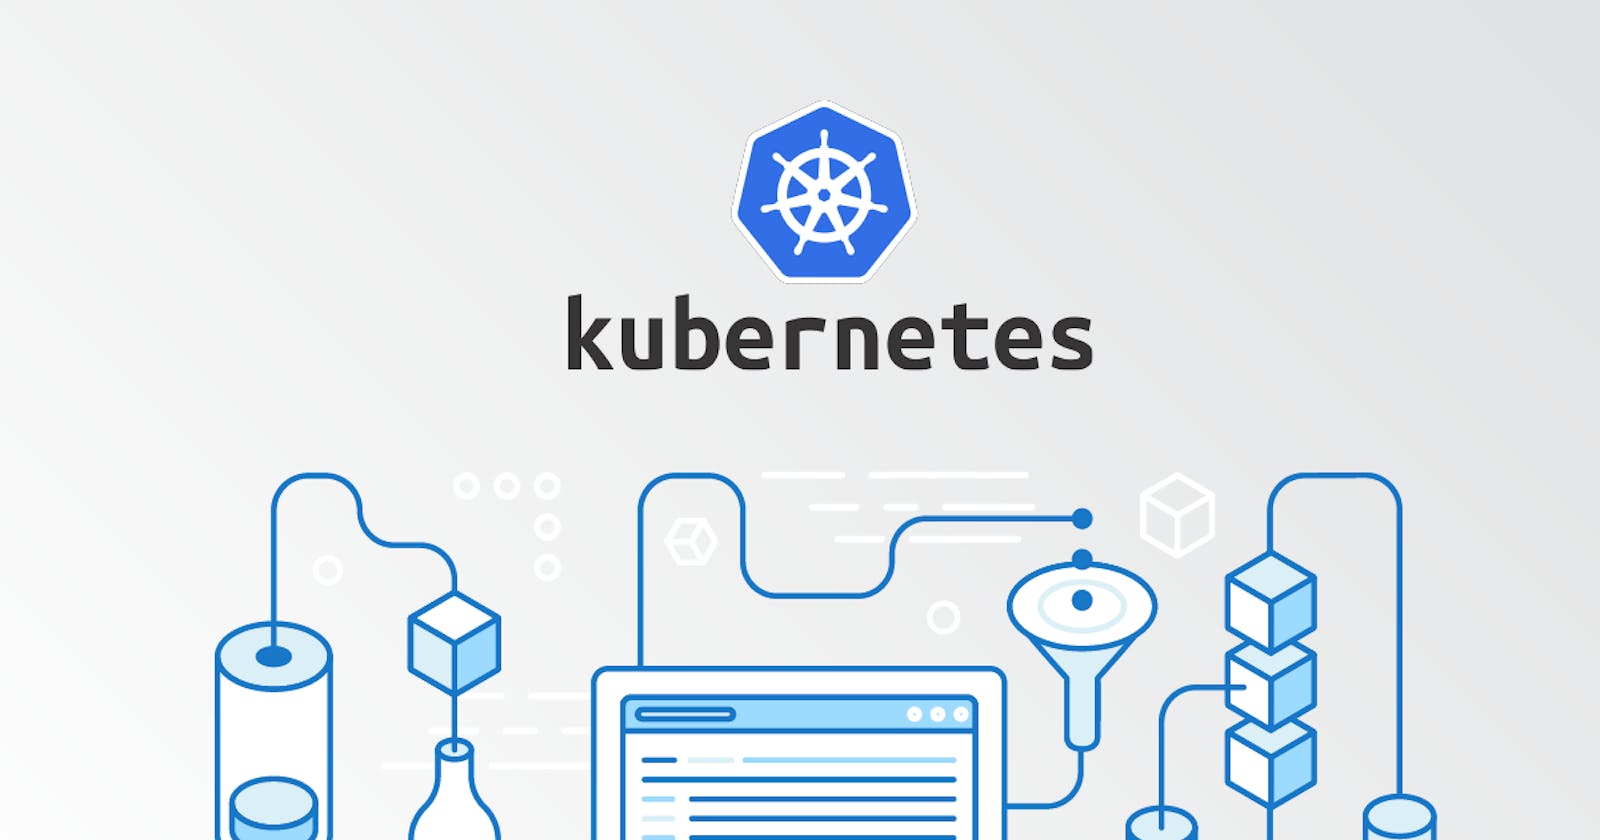 Booking.com, Spotify, Pinterest: How Kubernetes solved big problems for big companies